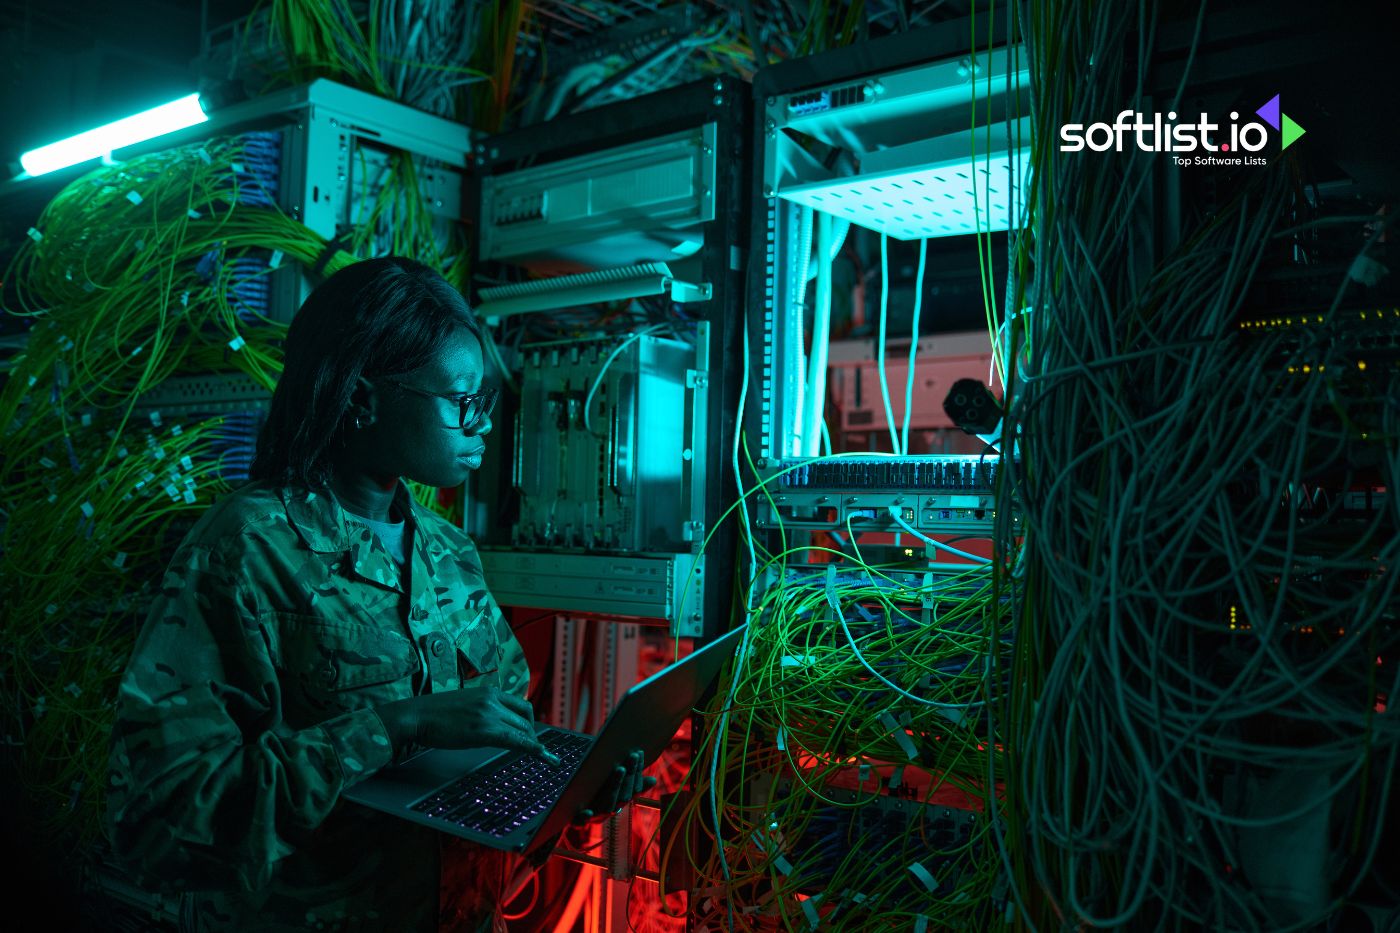 Female technician working on a laptop in a dimly lit server room